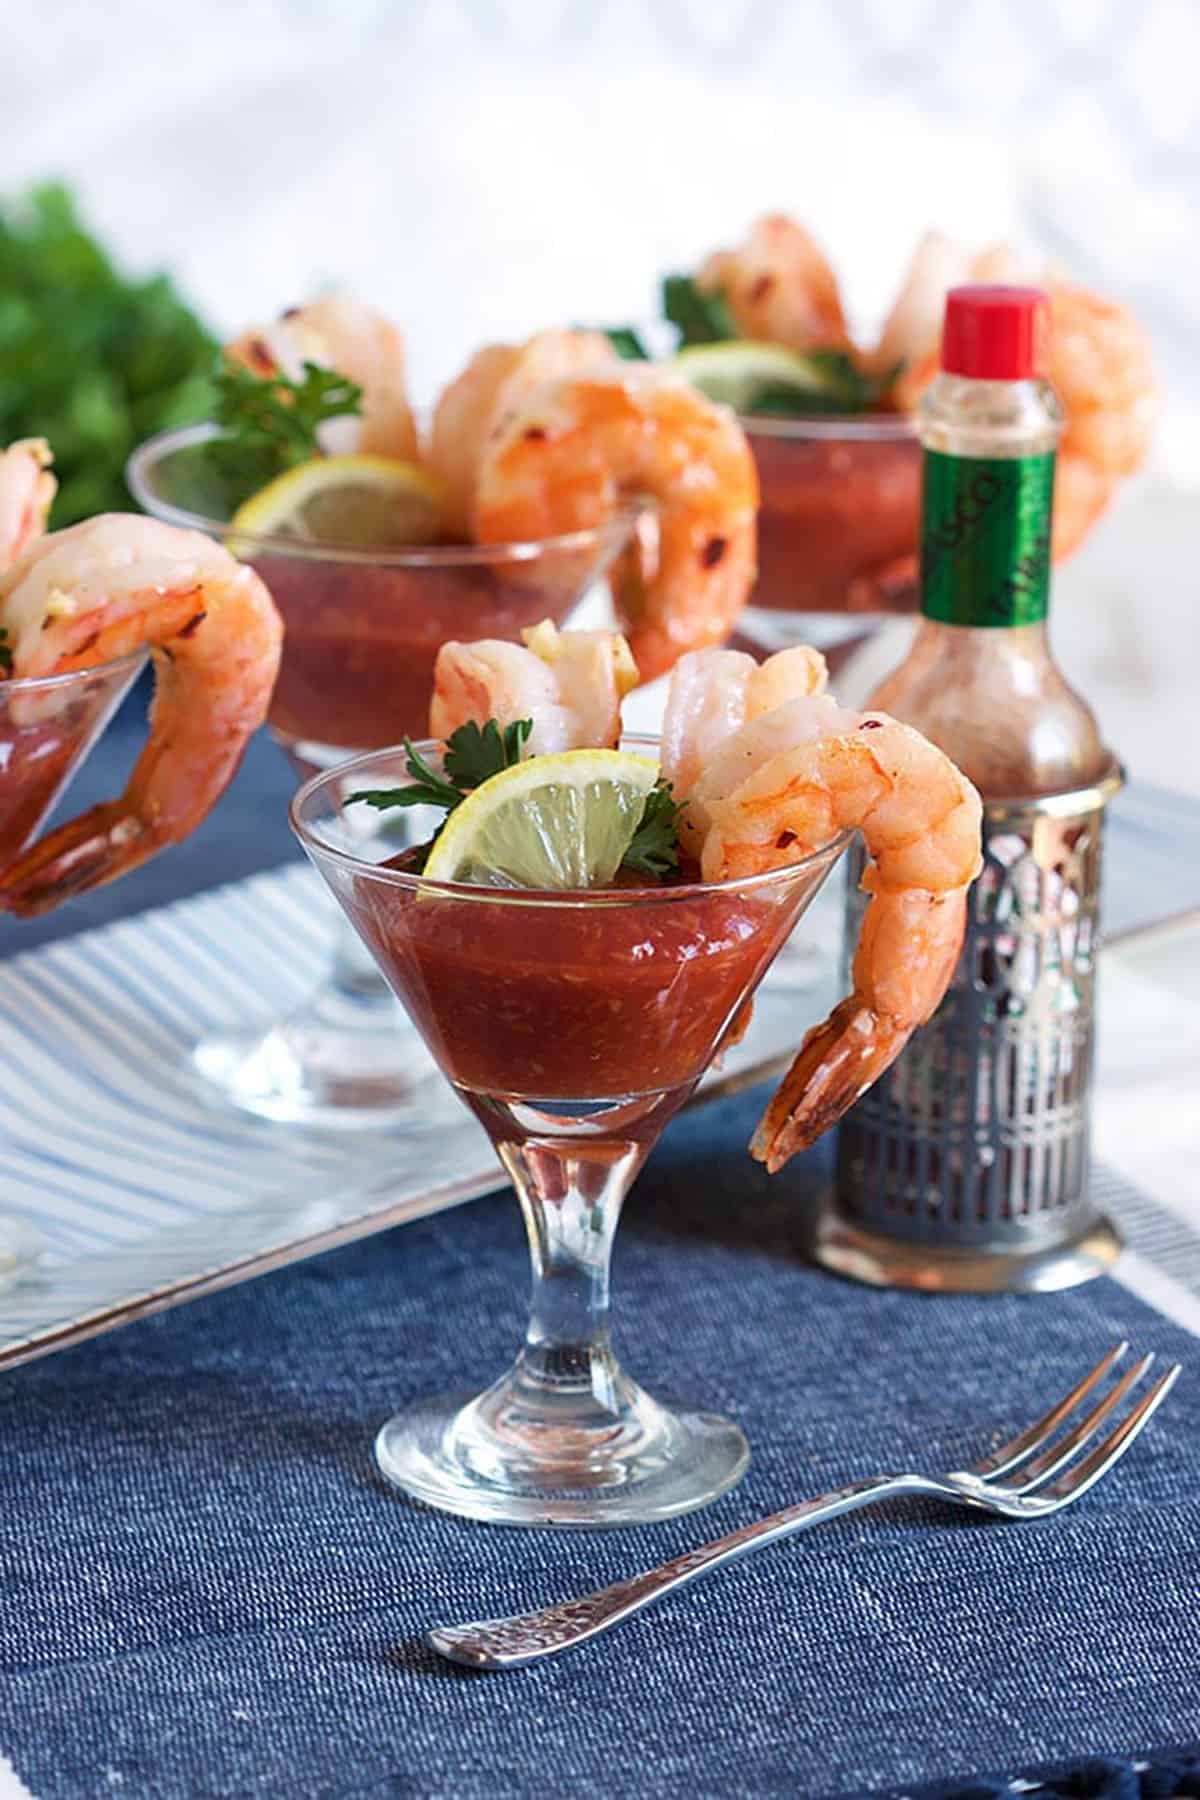 Shrimp cocktail plated on a mini martini glass filled with cocktail sauce and a bottle of tabasco in the background.